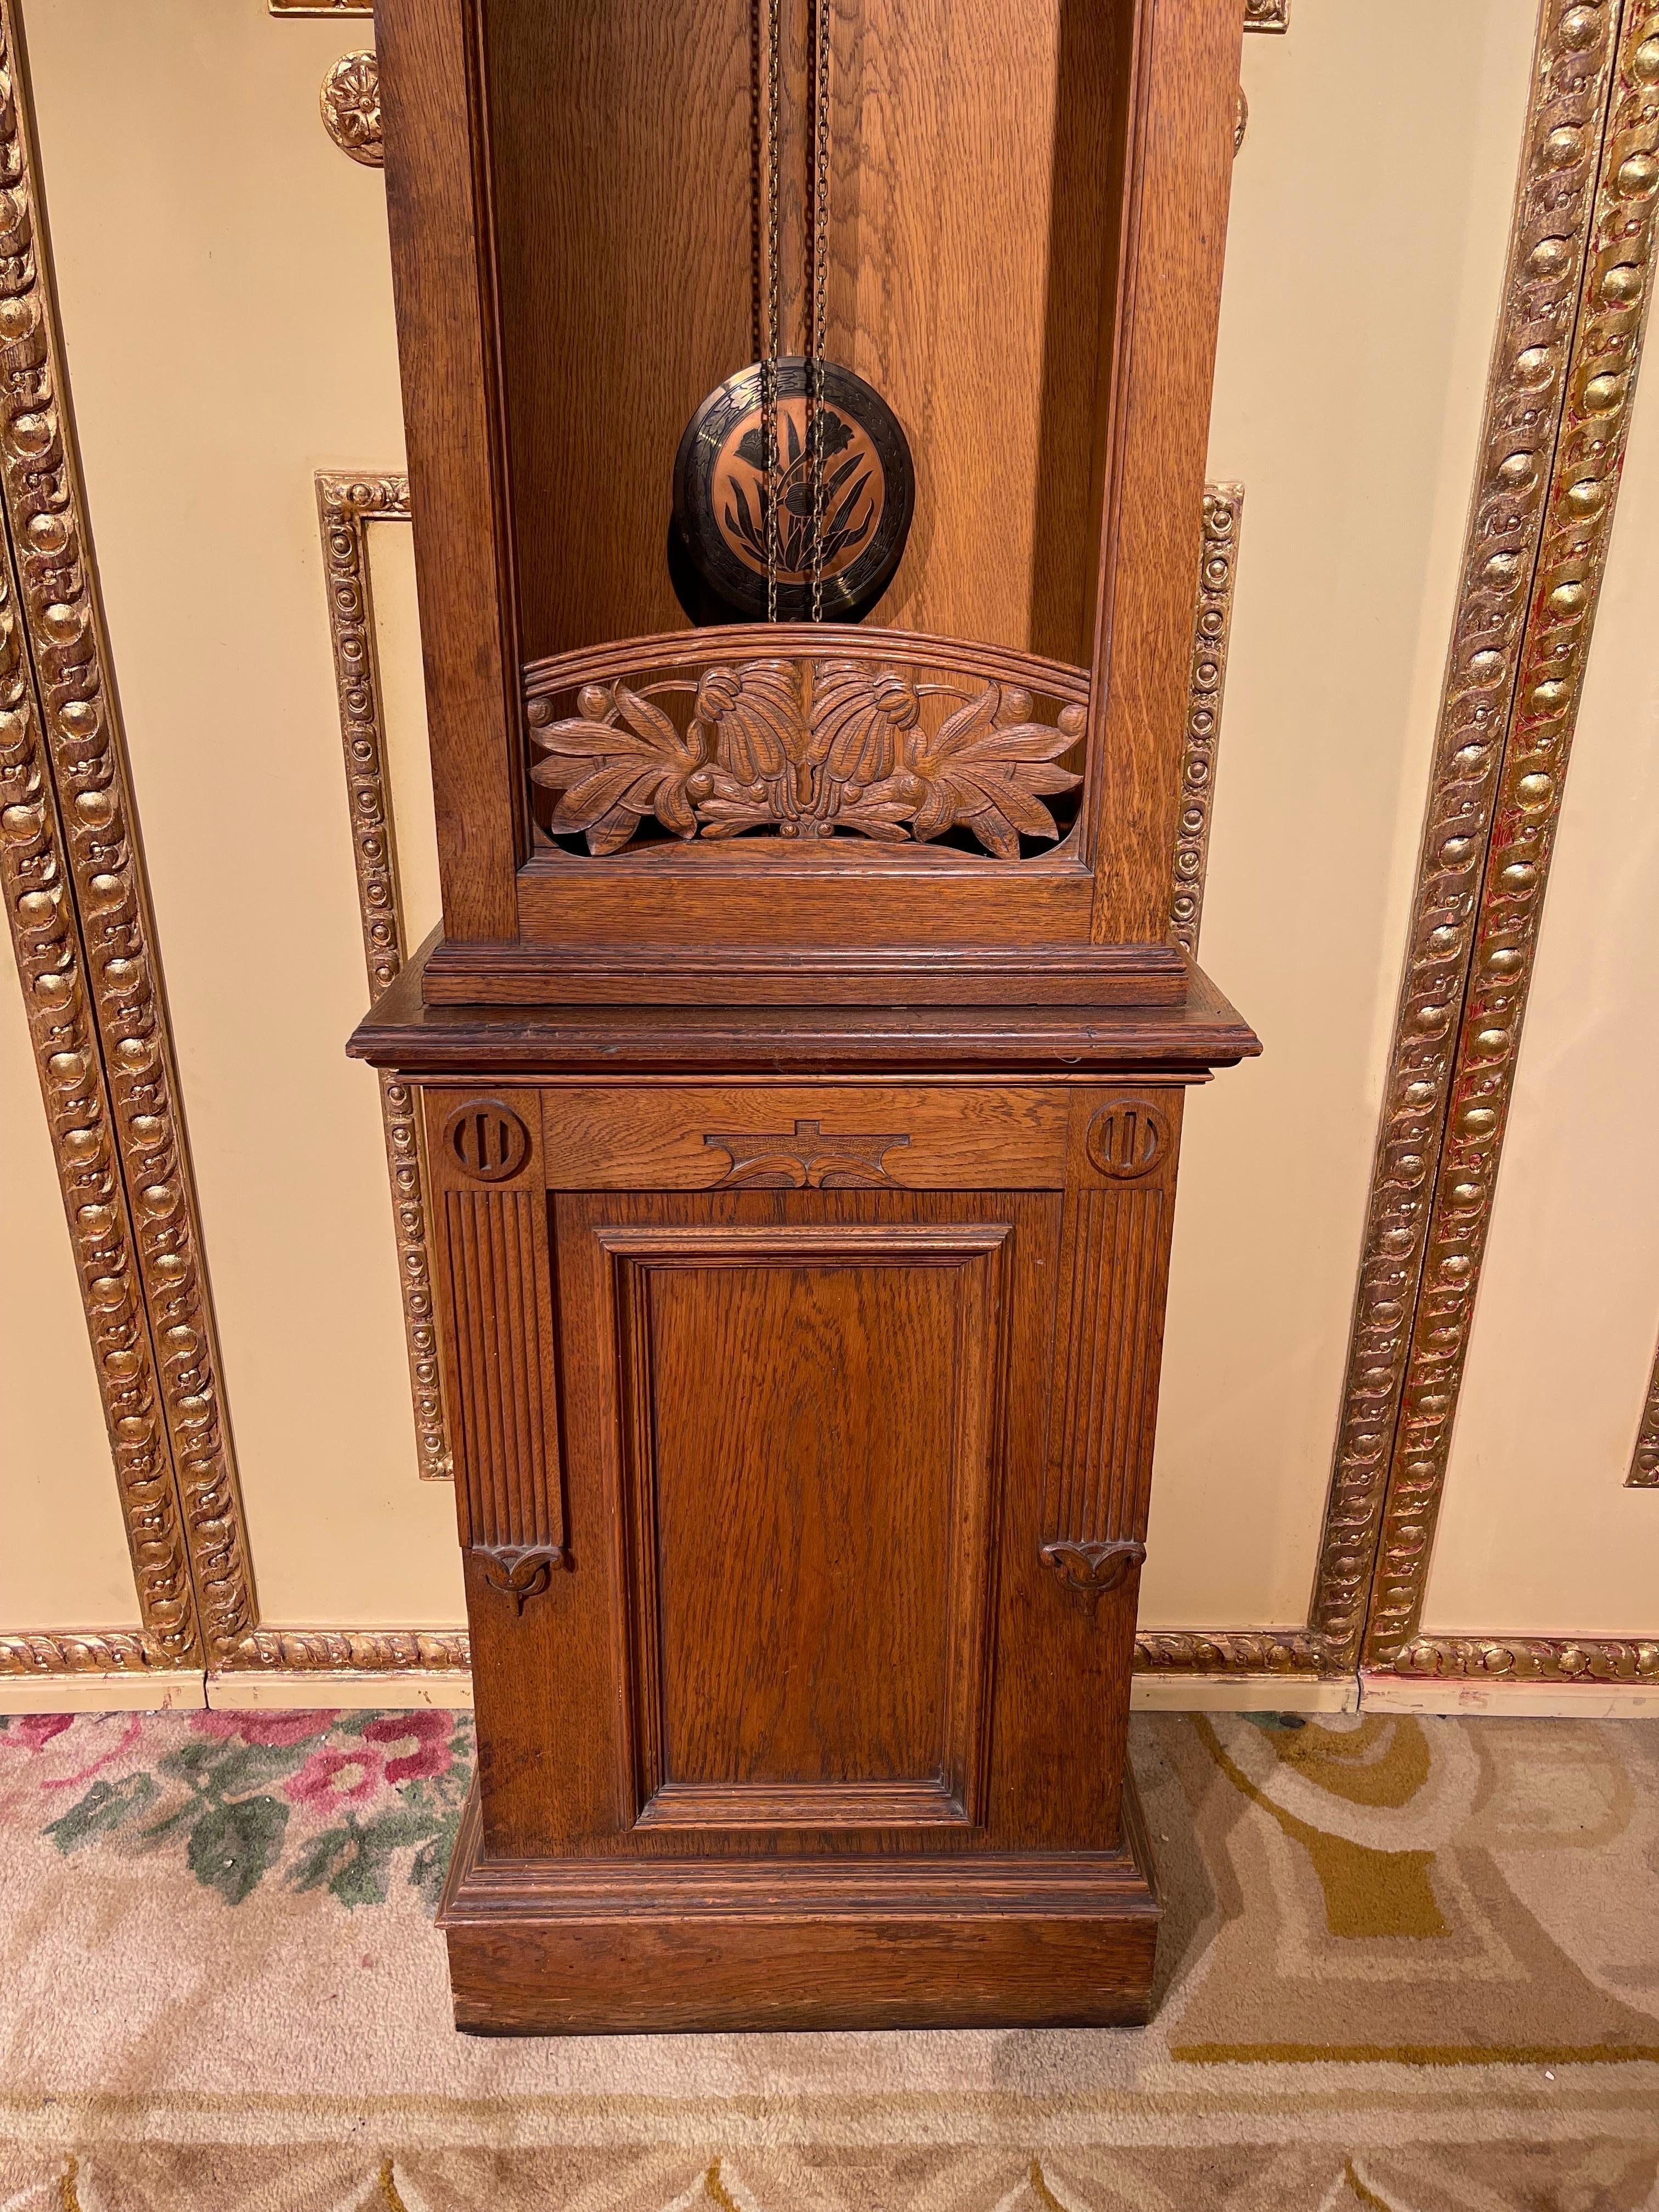 Hand-Carved Antique Art Nouveau Grandfather Clock, Germany, 1900